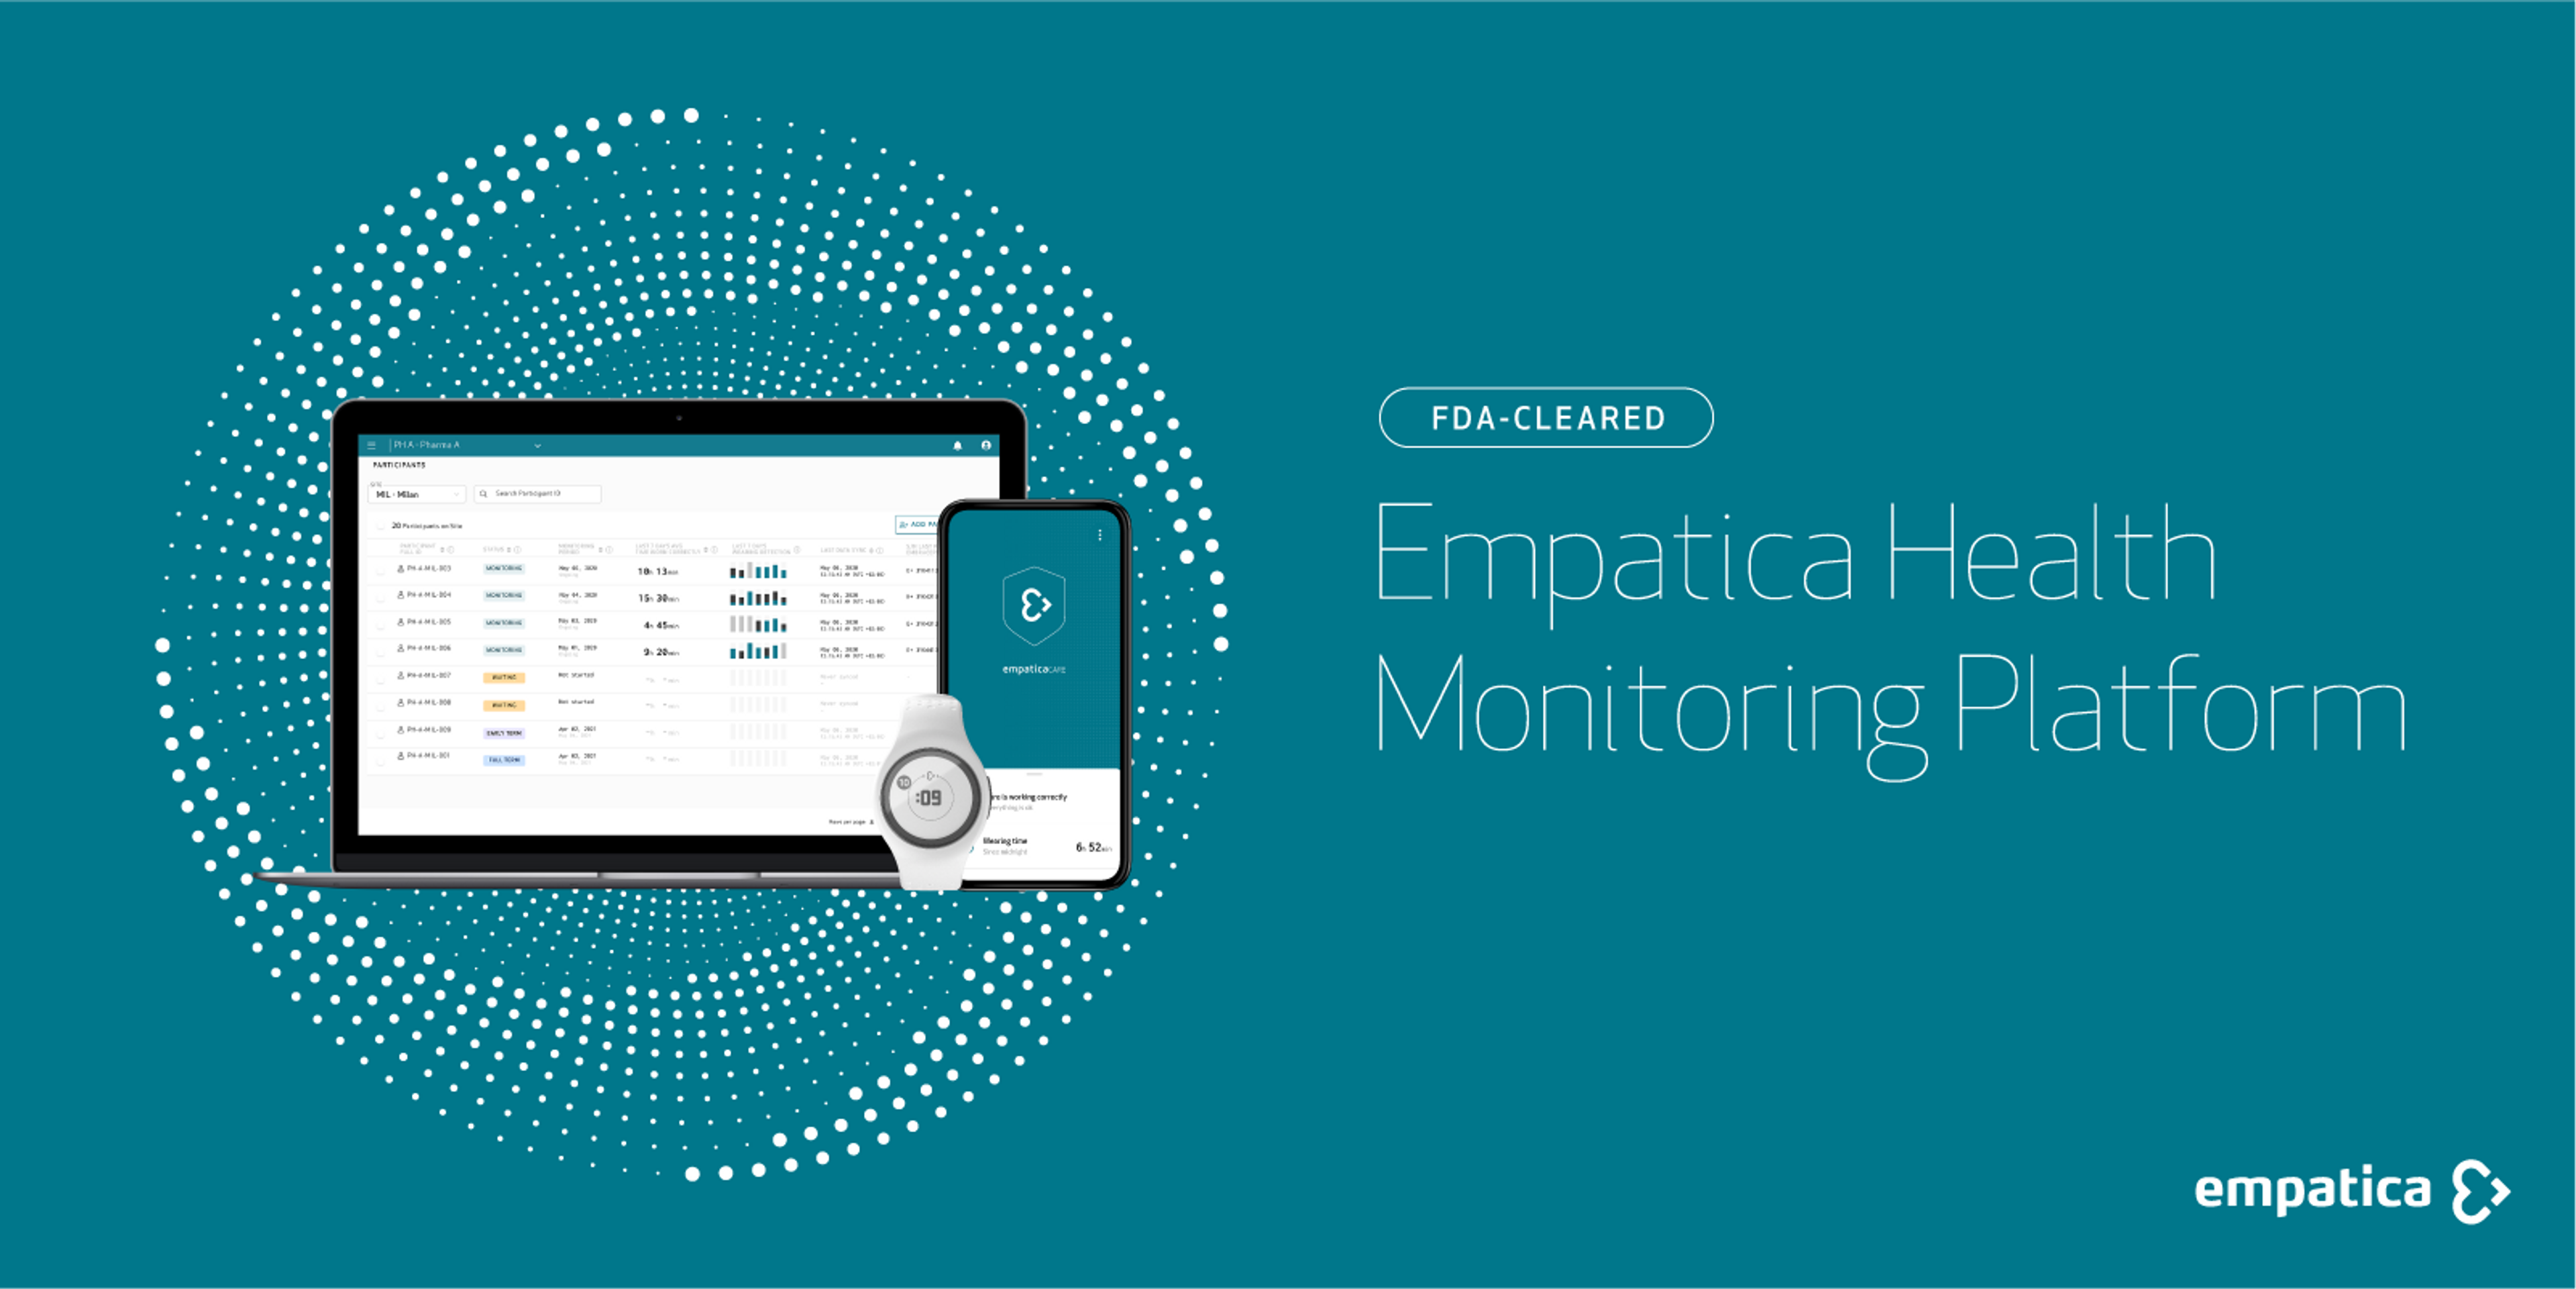 the-empatica-health-monitoring-platform-receives-fda-clearance-cover-image